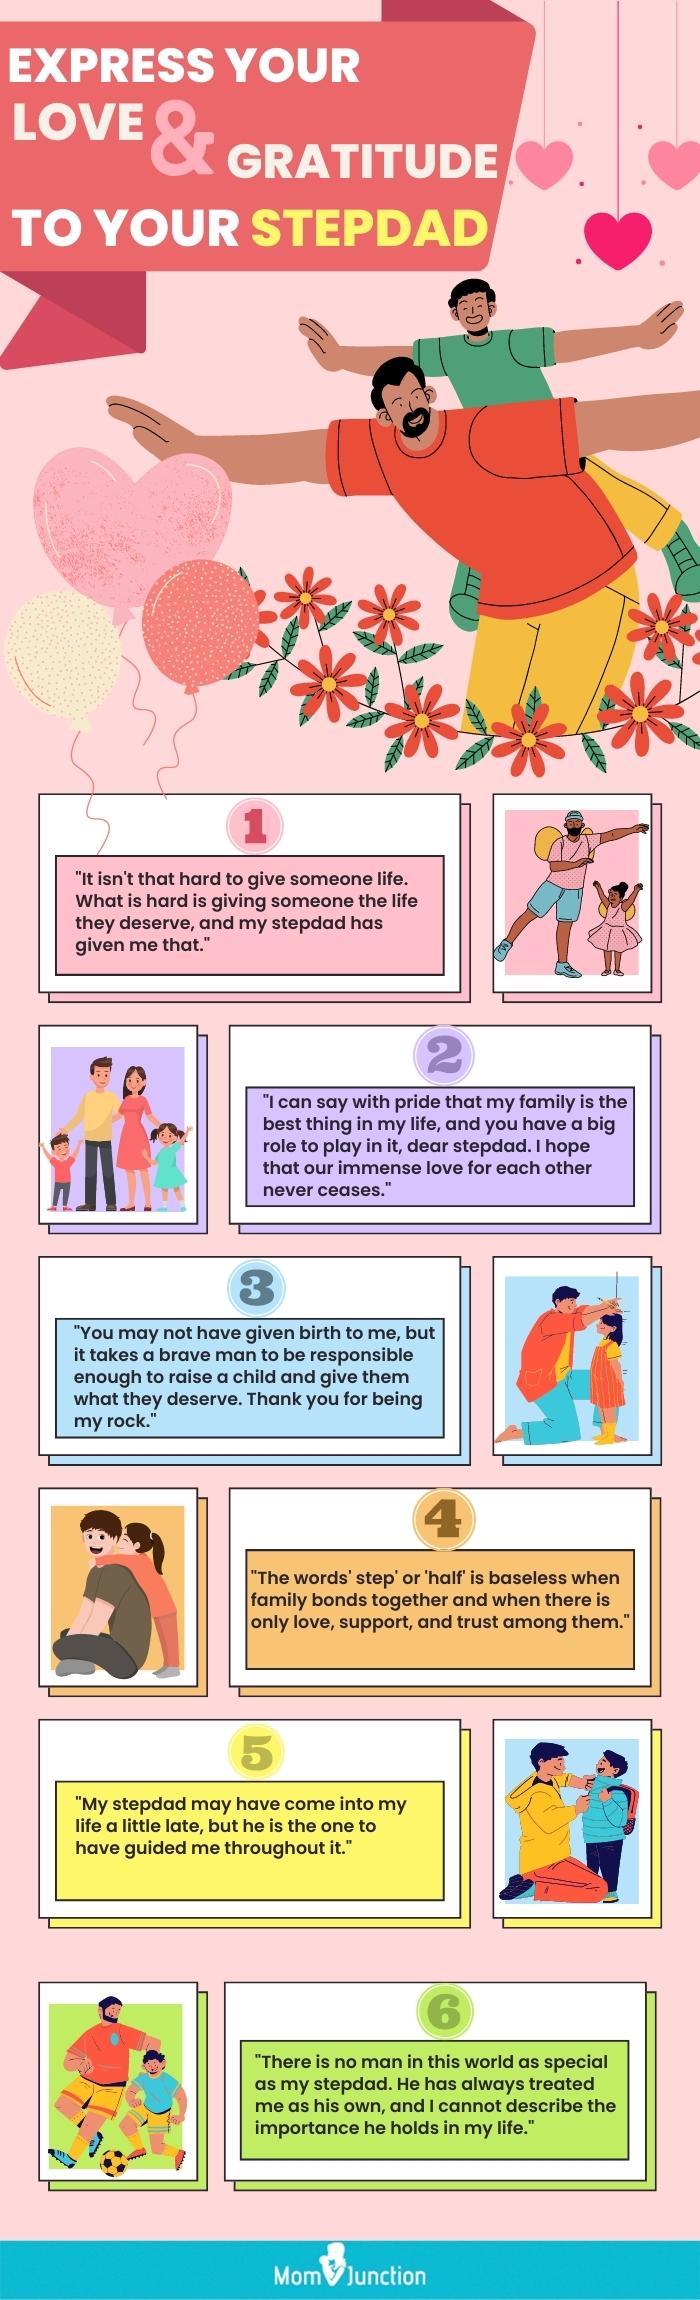 express your love and gratitude to your stepdad [infographic]